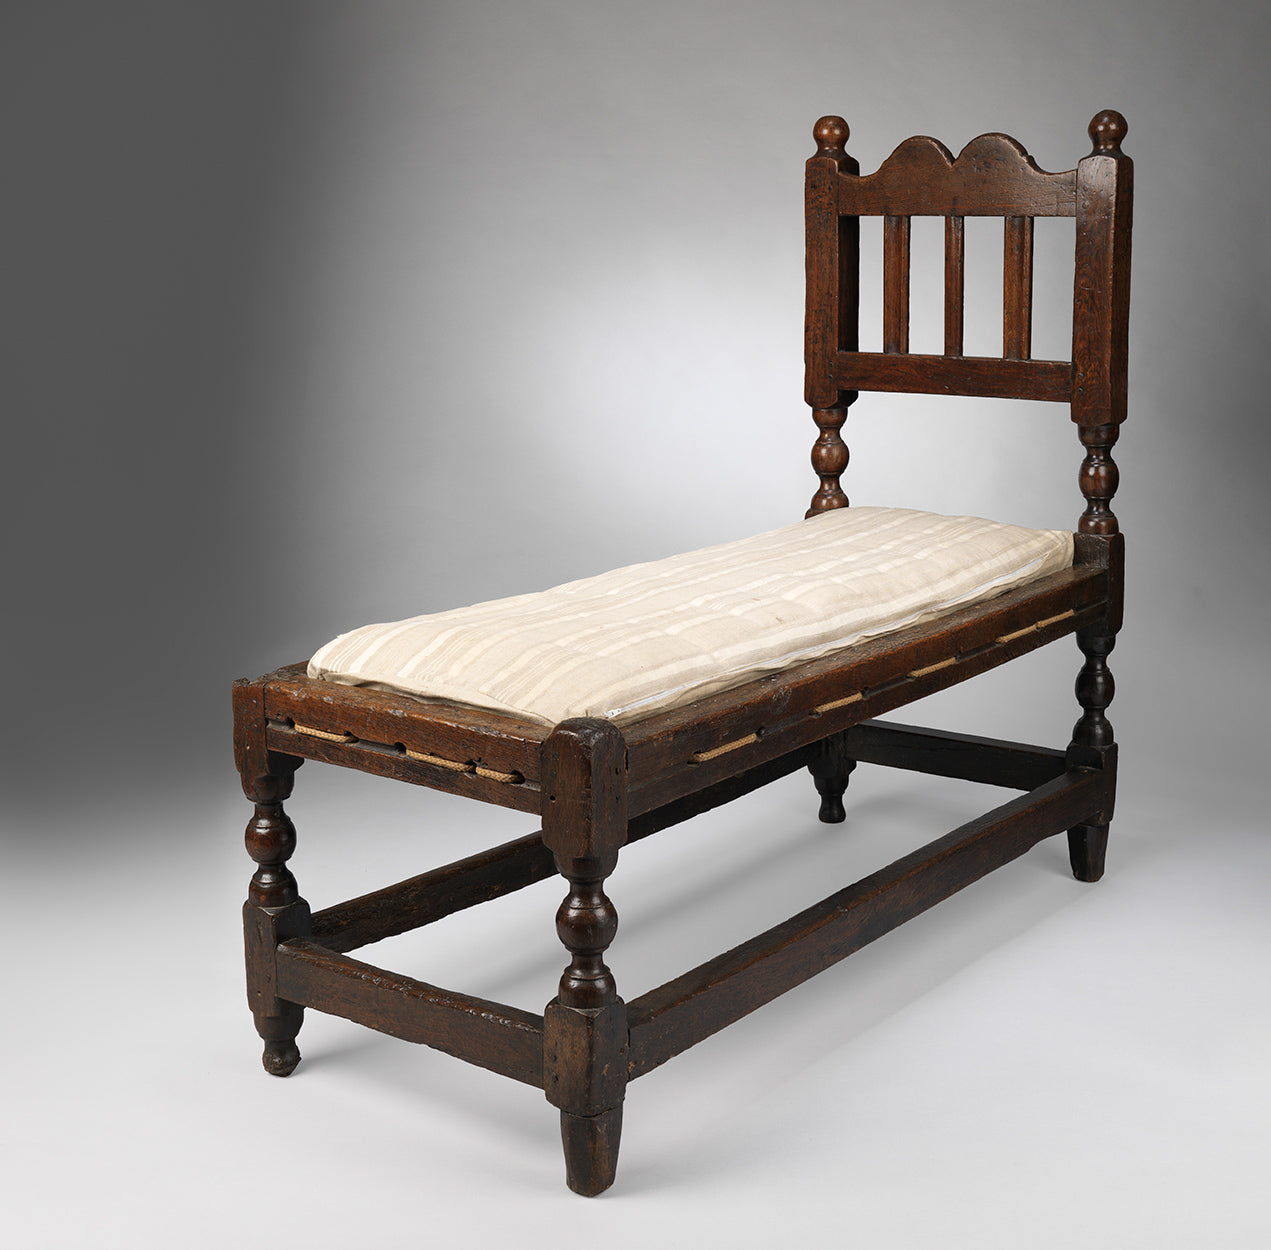 Rare Small William and Mary Period Joined Frame Day Bed